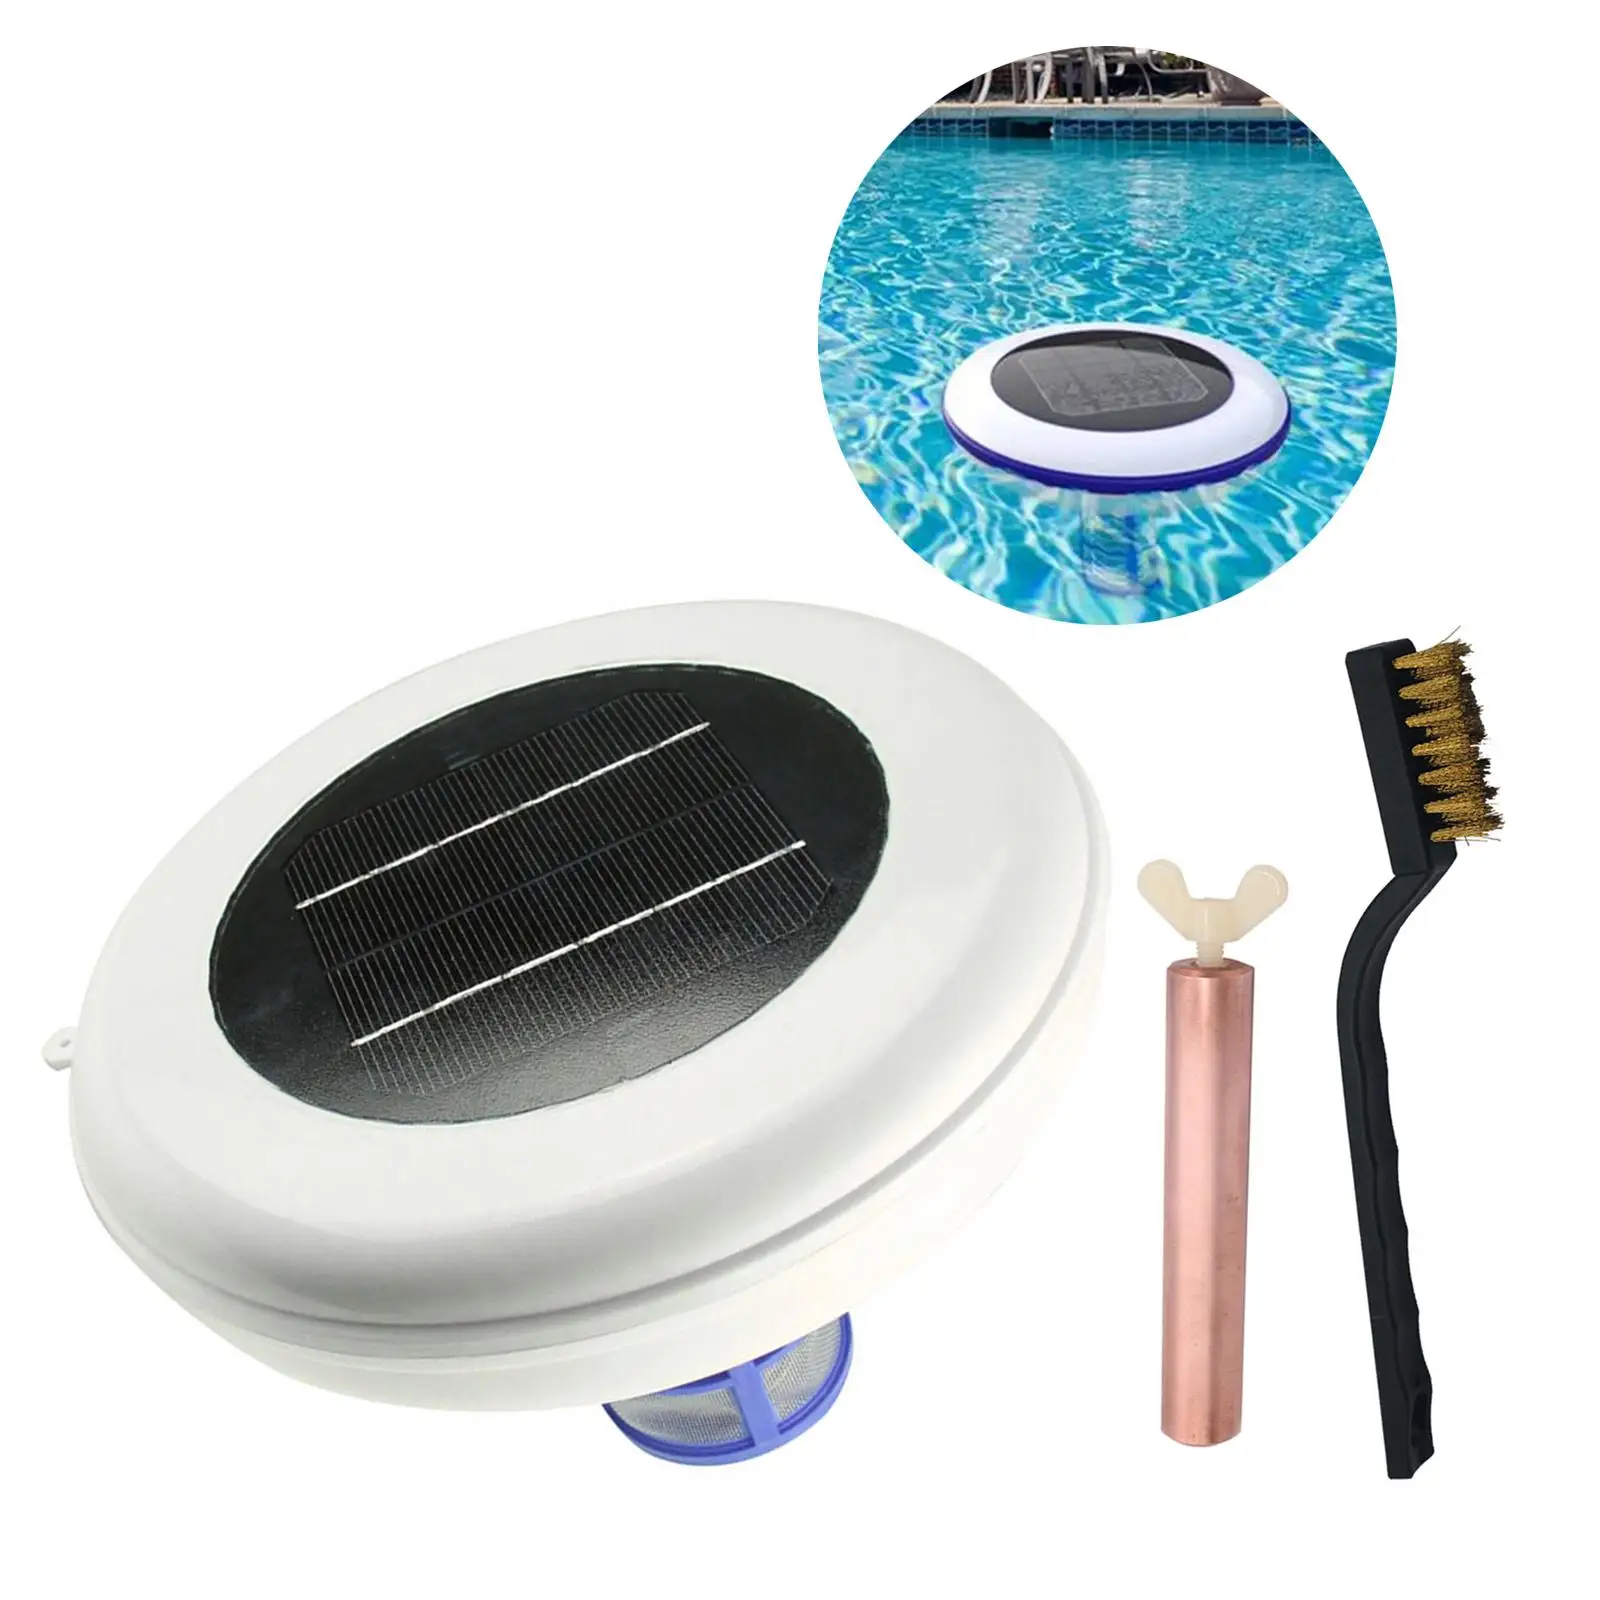 Solar Powered Pool Clarifier with Cleaning Brush,Pool Solar Ionizer System for SPA